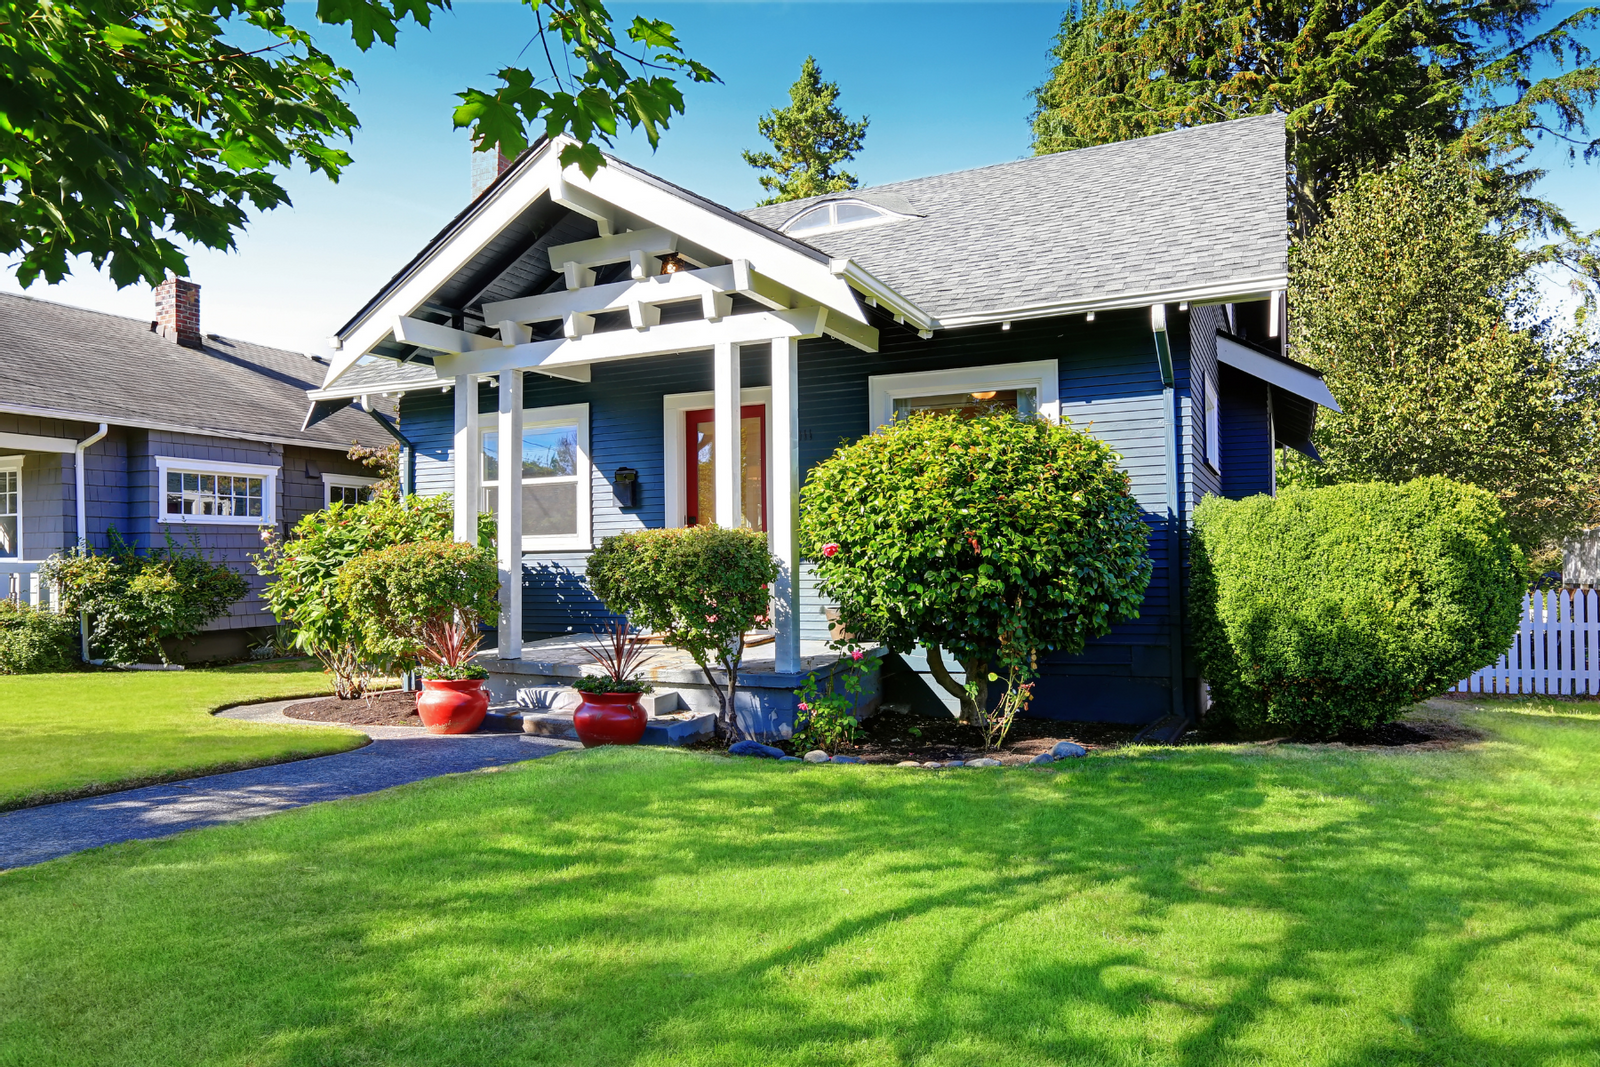 Clever ways to boost your home’s curb appeal